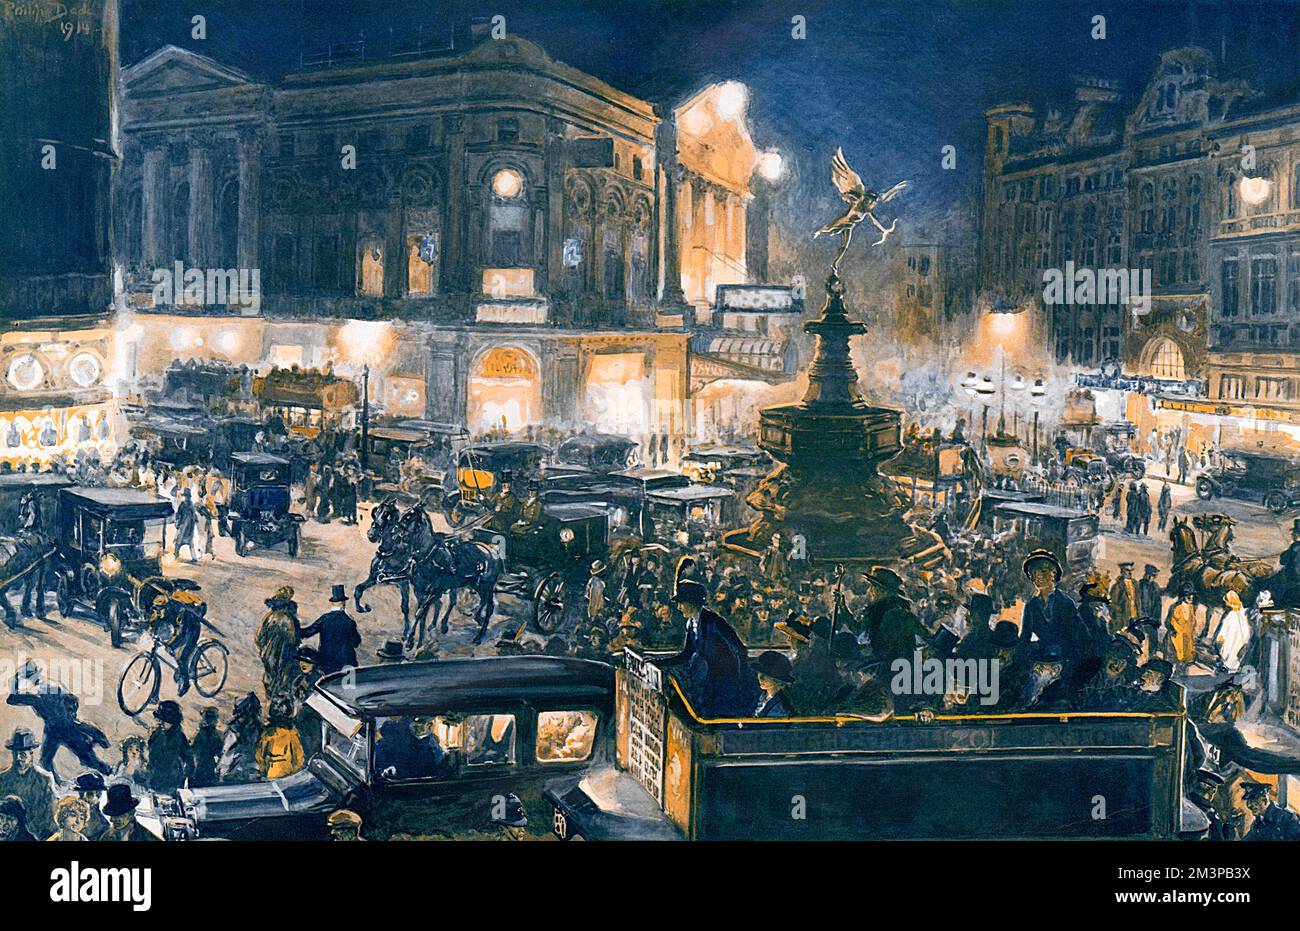 Cars, taxis and horse-drawn cabs jostle for position around Eros in Piccadilly Circus as society leaves restaurants and make their way to London's West End theatres.  A typical scene in the capital at the height of the summer Season.       Date: 1914 Stock Photo